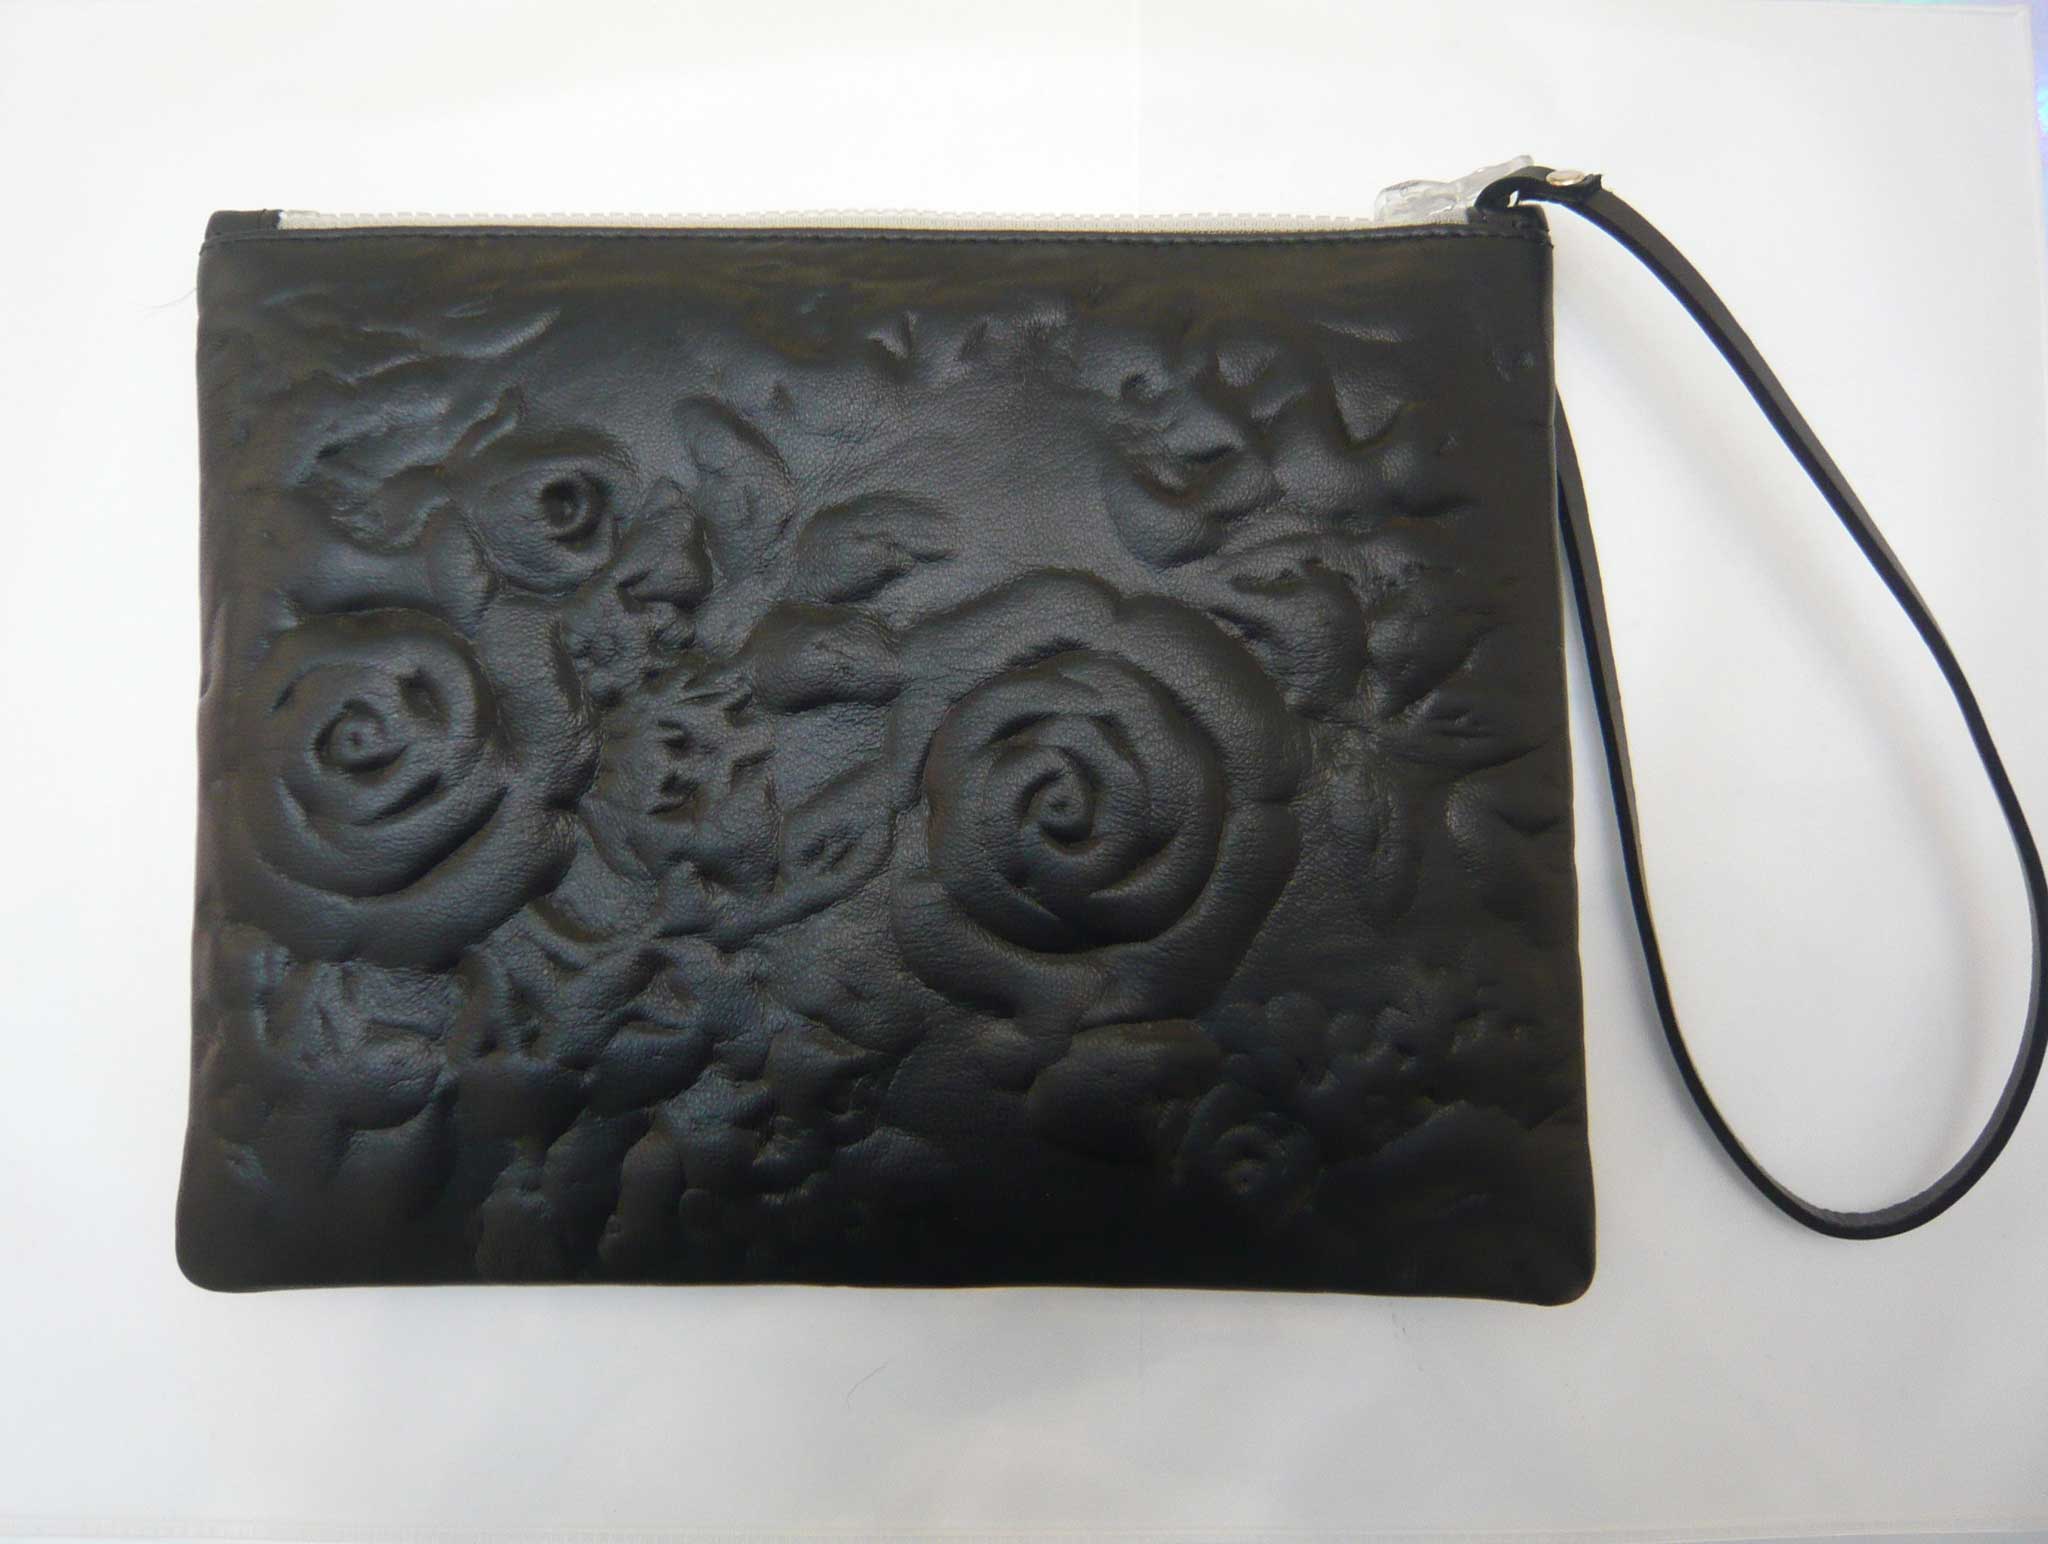 Christopher Kane's leather clutch bag is embossed with roses which are only visible when they catch the light